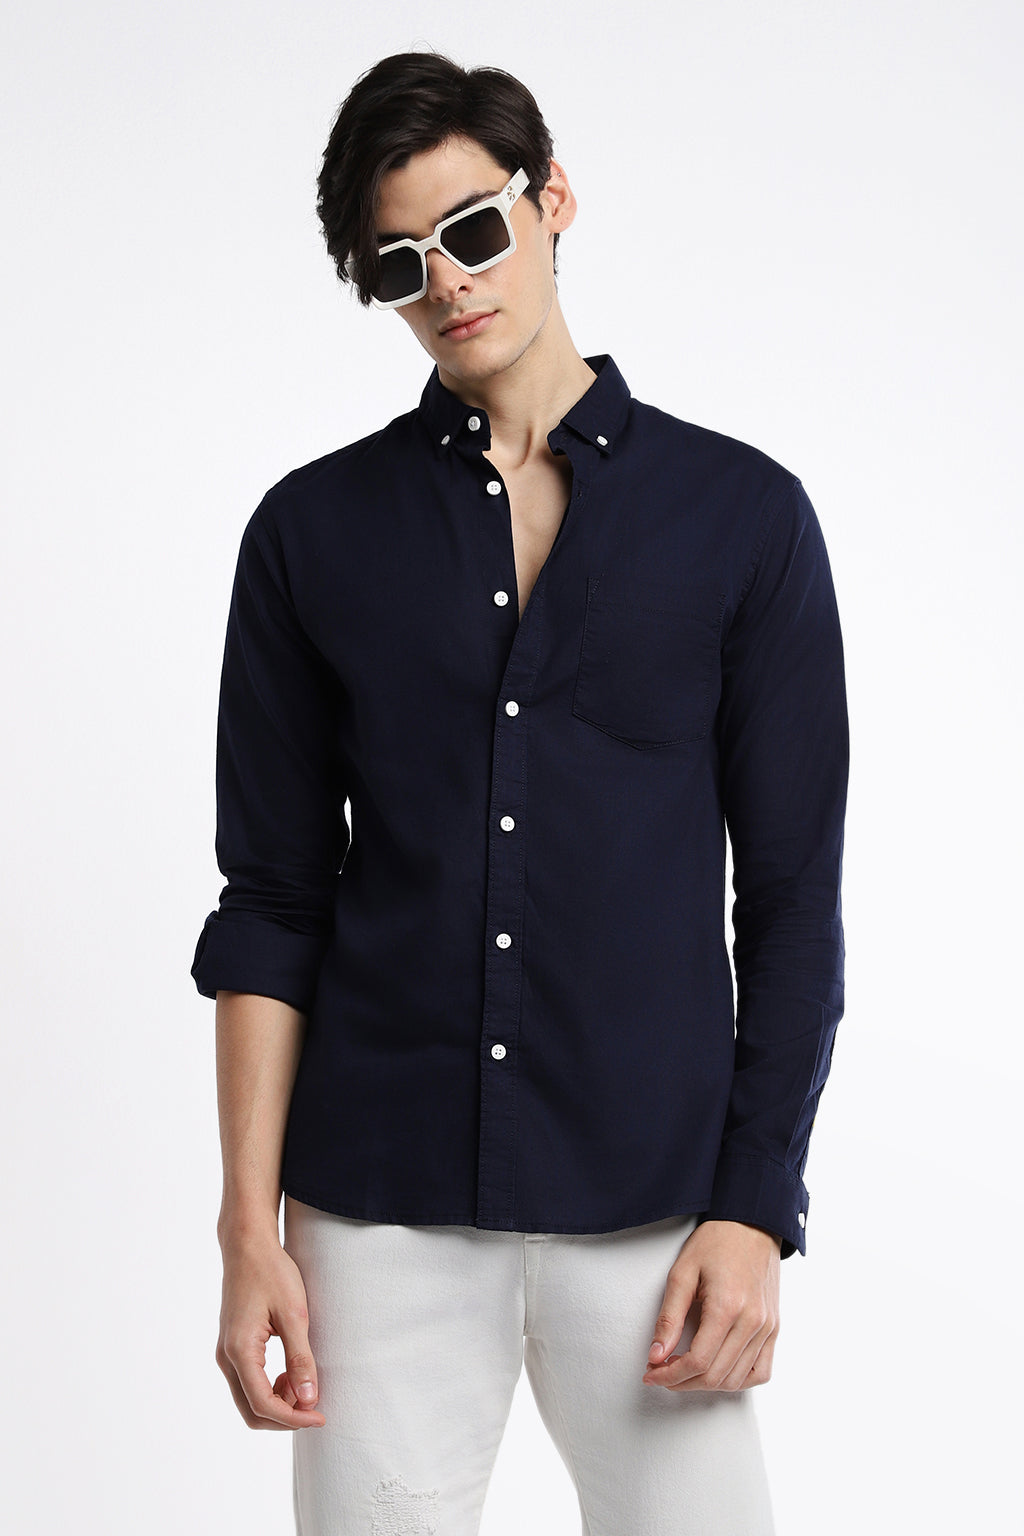 SOLID NAVY BLUE COTTON SHIRT